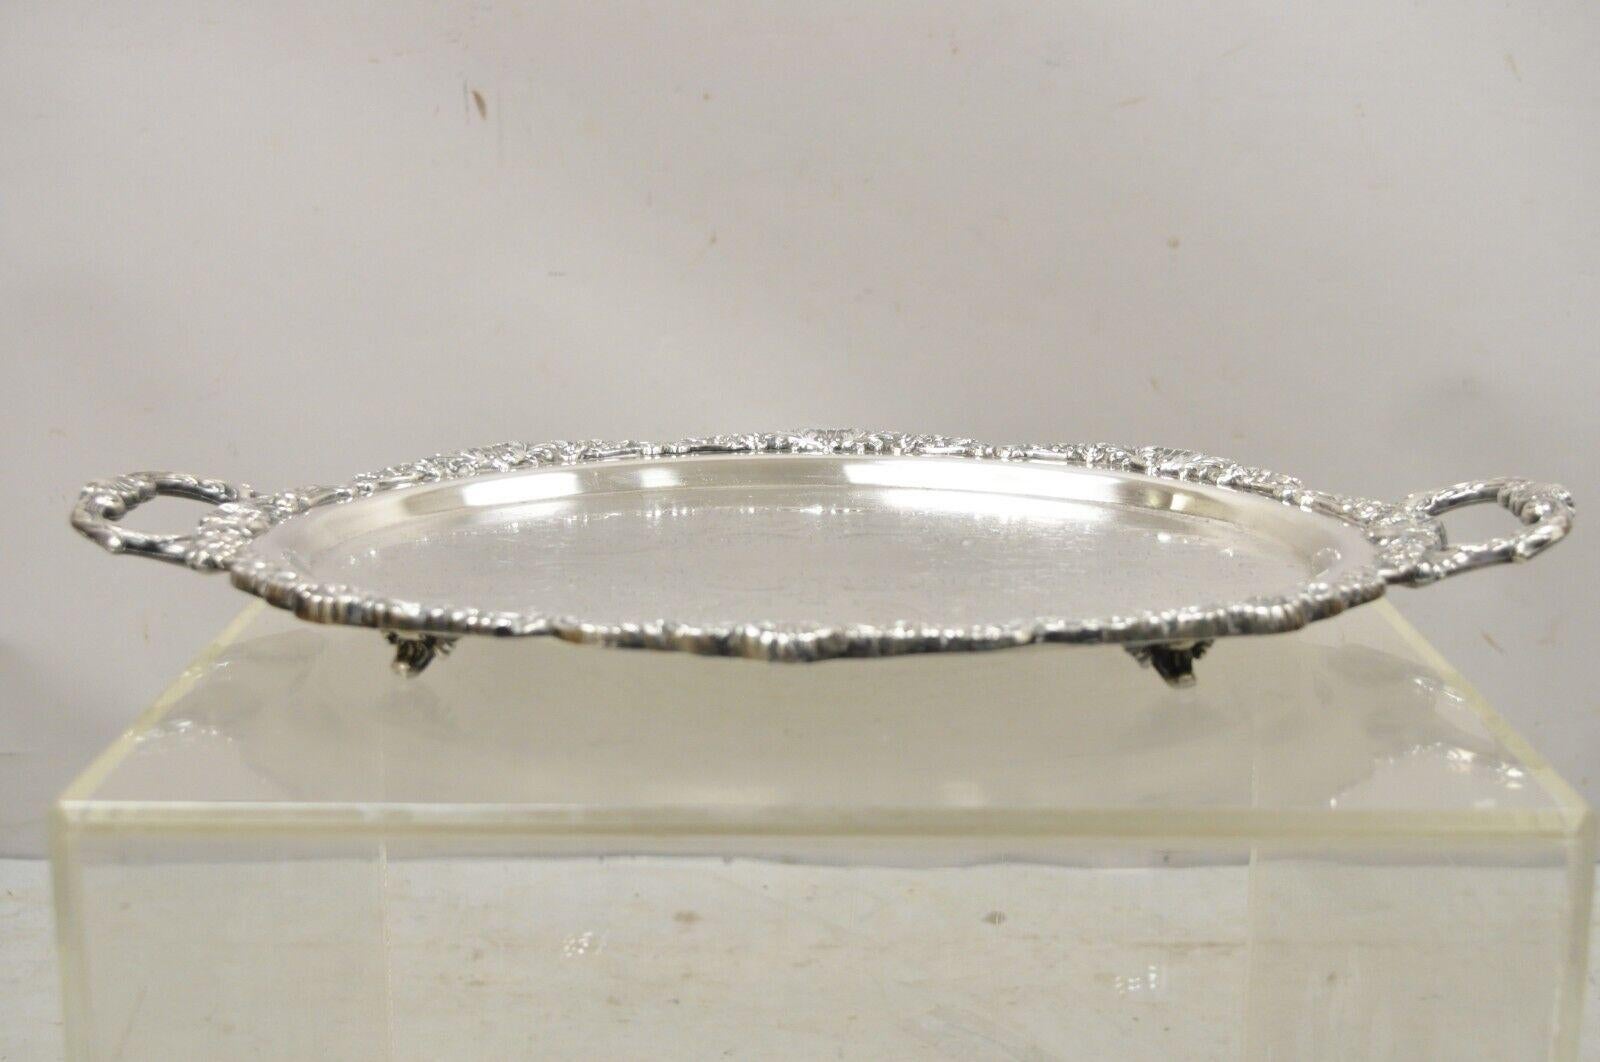 Vintage EPCA Bristol silverplate by Poole Silver plated oval platter tray. Item features raised on feet, ornate twin handles, oval form, original stamp, very nice vintage item, great style and form. circa Early to Mid-20th century. Measurements: 2